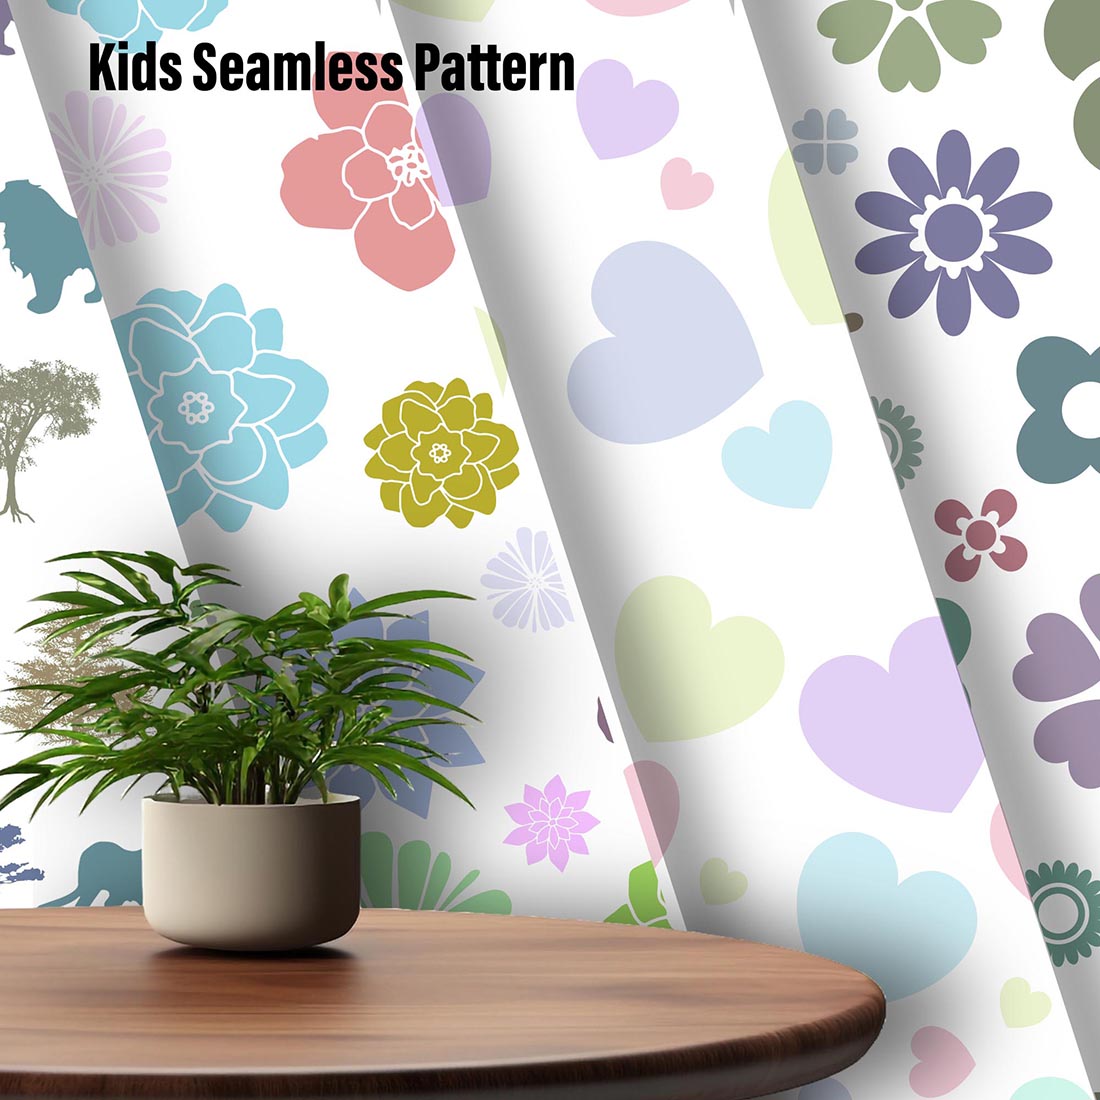 Seamless Pattern Texture for kids Room Decor and Gift Wrapping preview image.